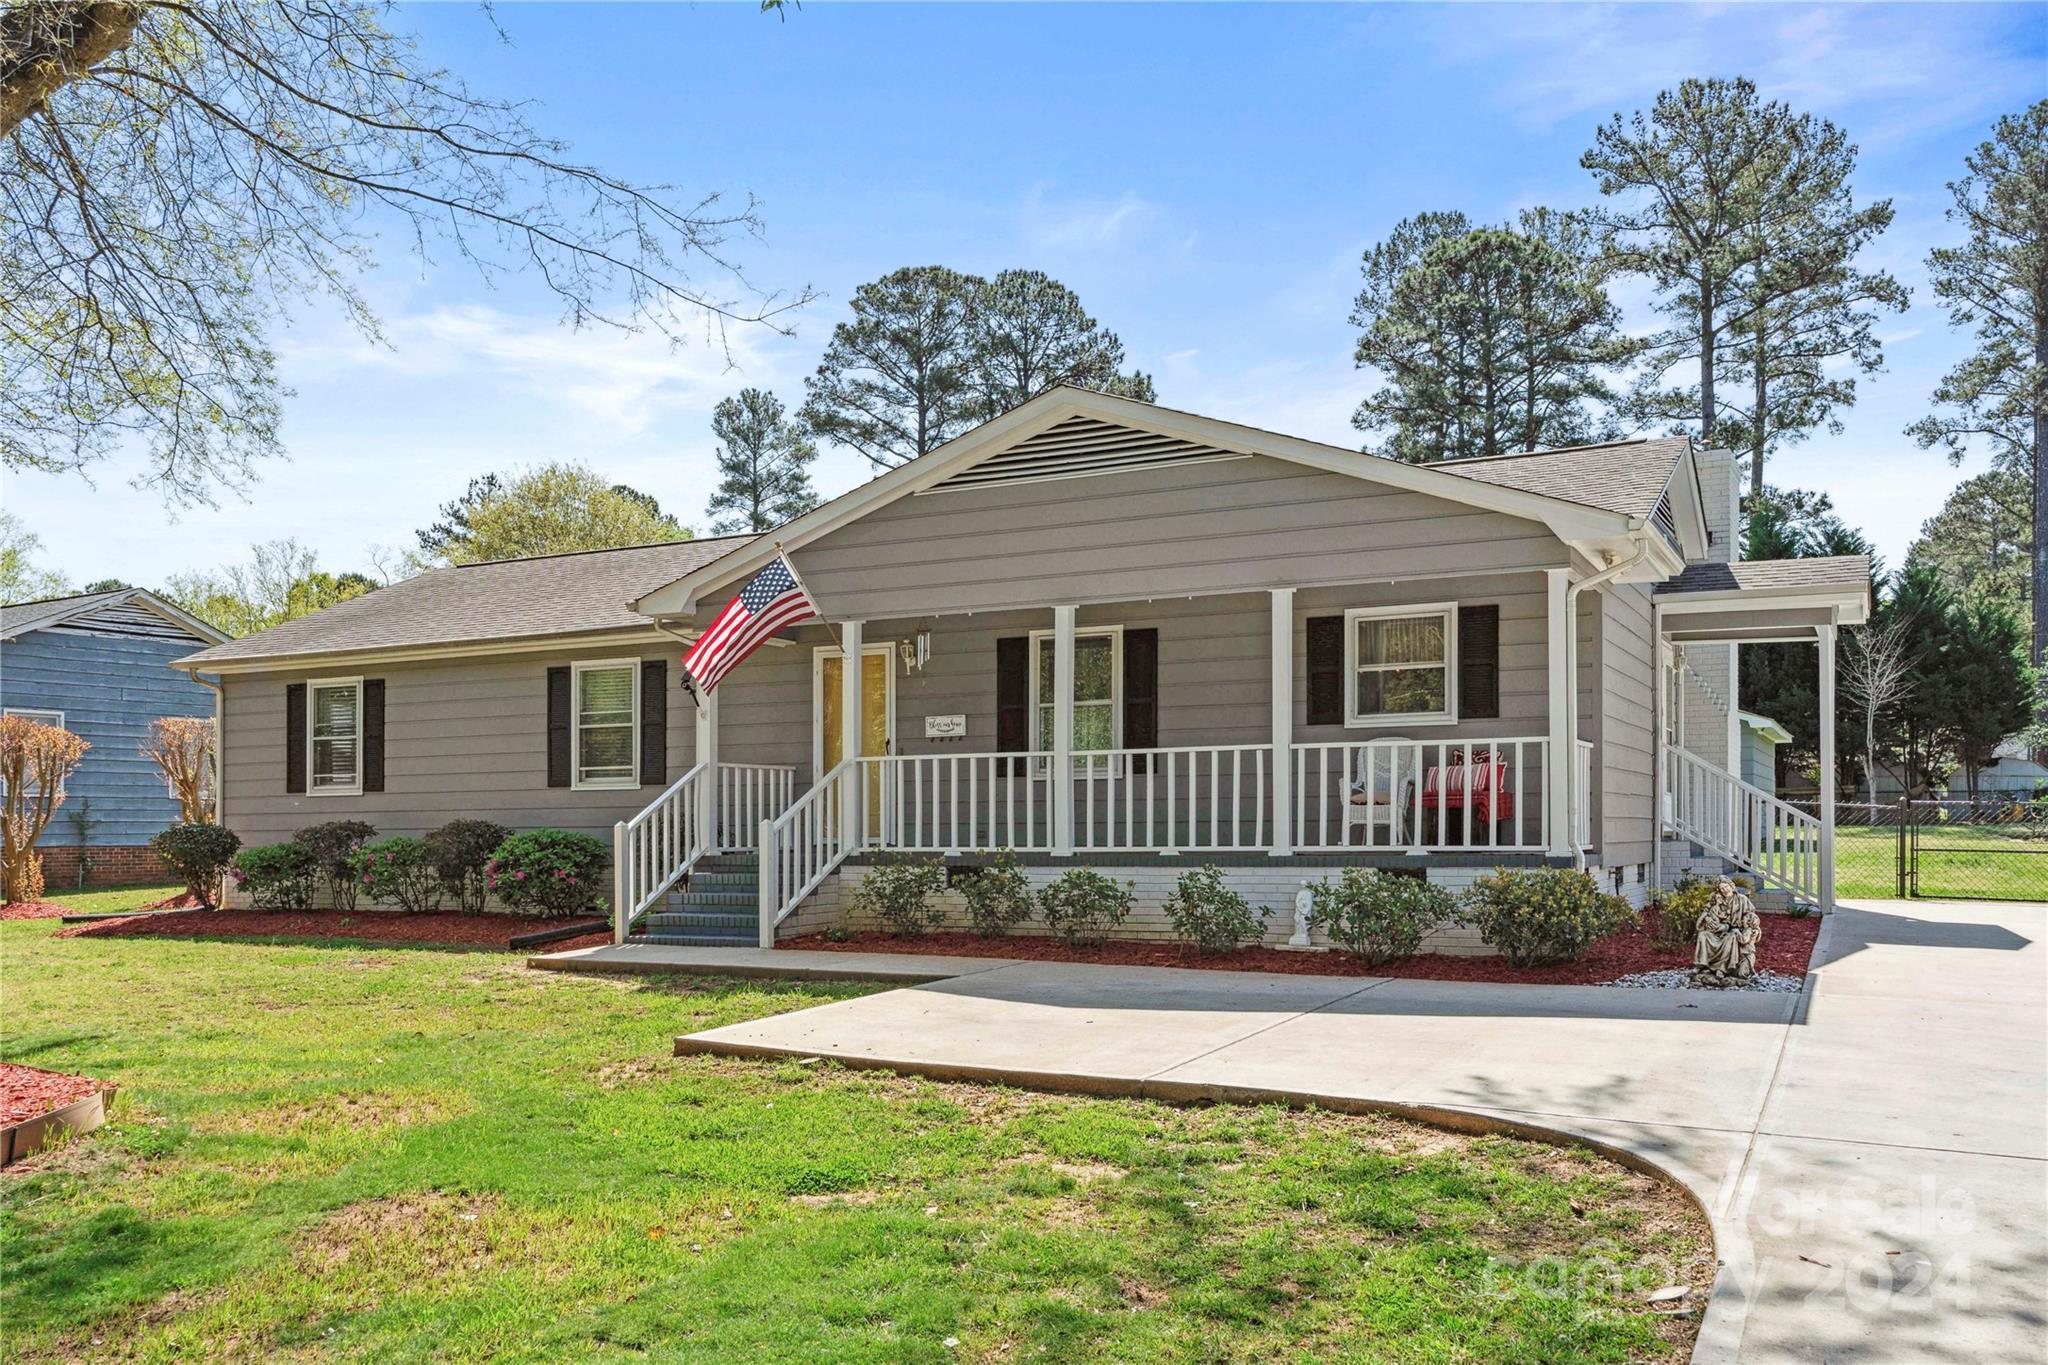 Photo one of 1026 Princeton Rd Rock Hill SC 29730 | MLS 4125589